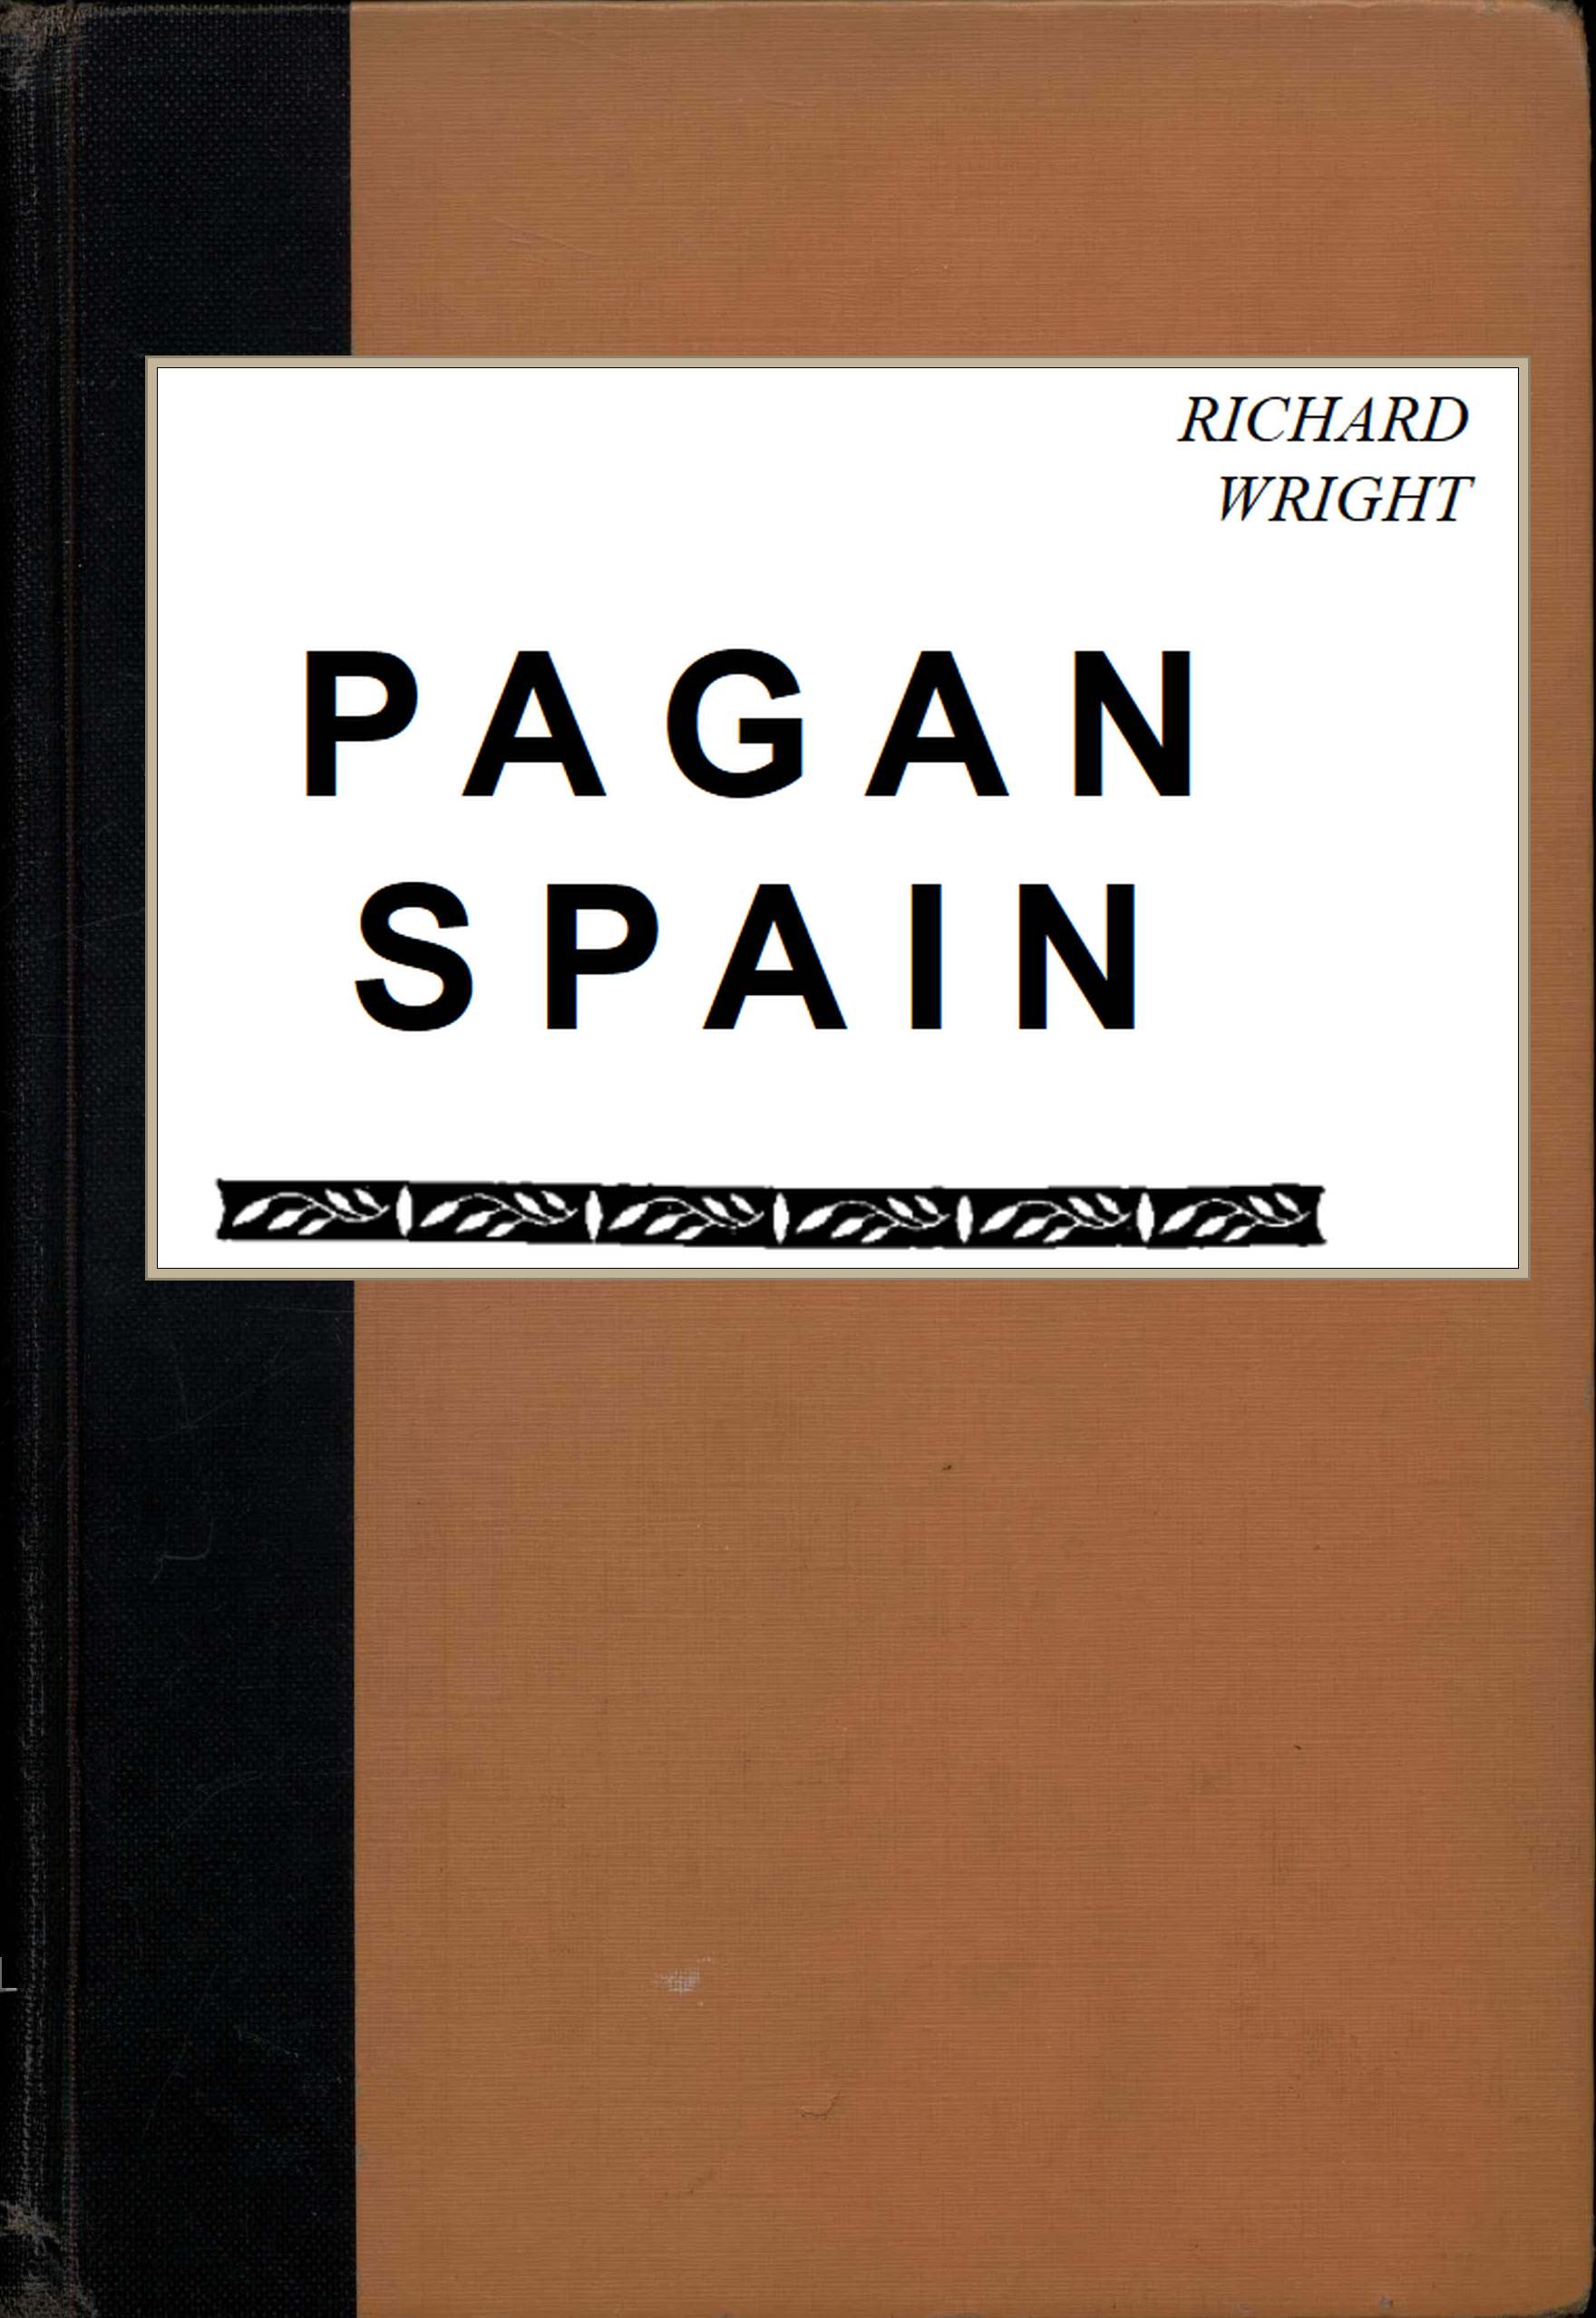 The Distributed Proofreaders Canada eBook of Pagan Spain, By Richard Wright. photo